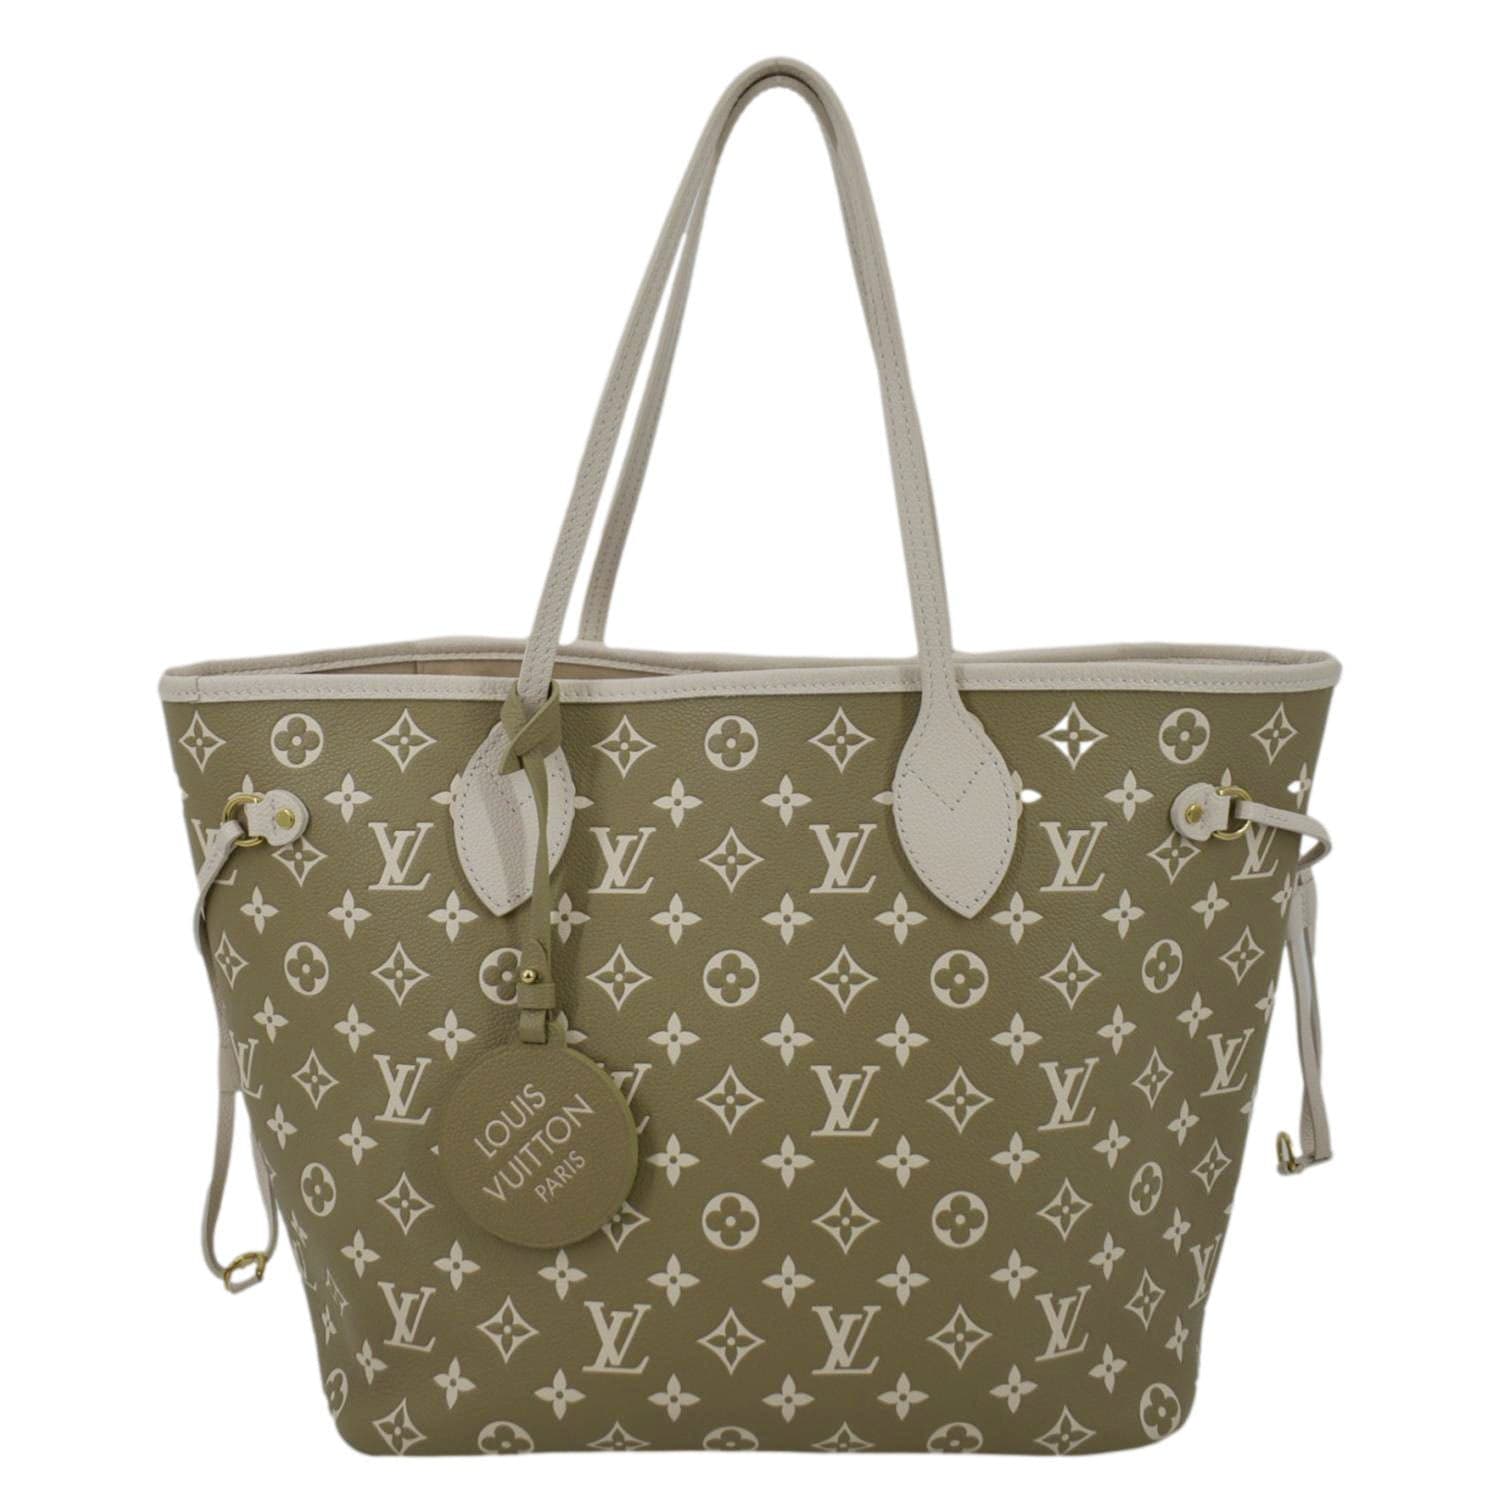 LOUIS VUITTON Neverfull MM Spring City Leather Tote Shoulder Bag Bicol